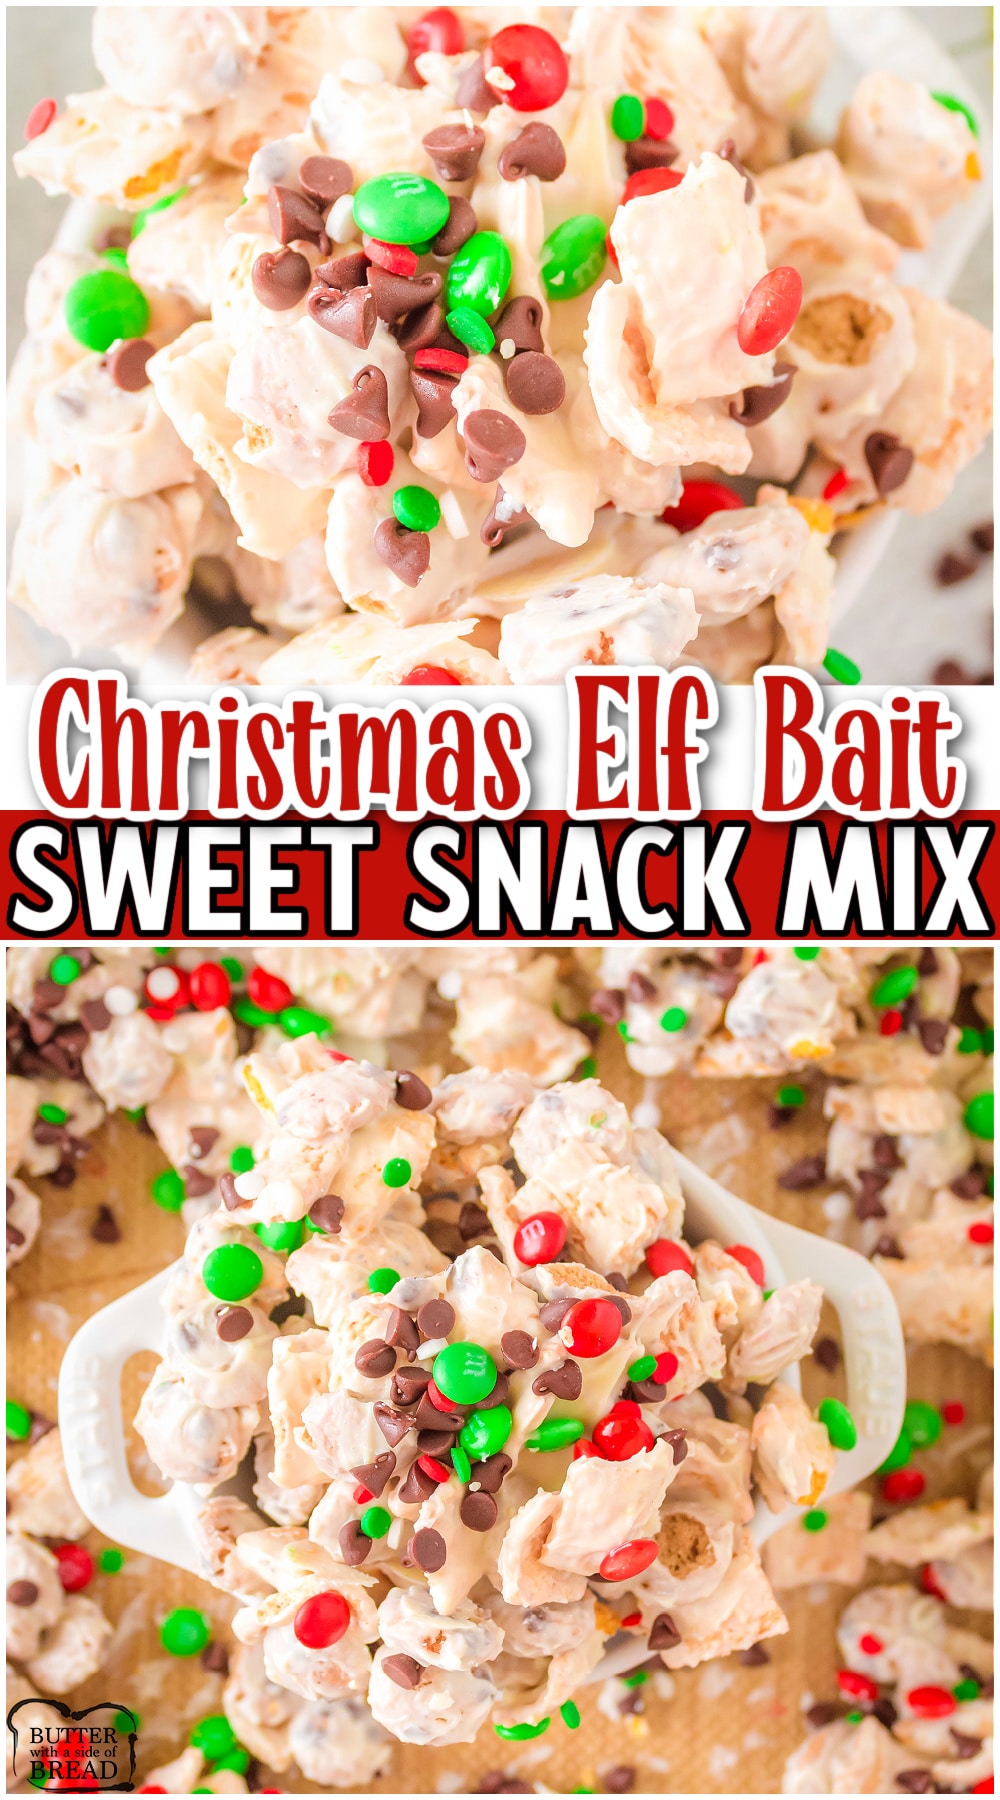 Elf Bait Christmas Snack Mix made with 3 cereals coated in white chocolate & tossed with M&M's and sprinkles! Simple, fun sweet snack mix perfect for parties & holiday gifts! 